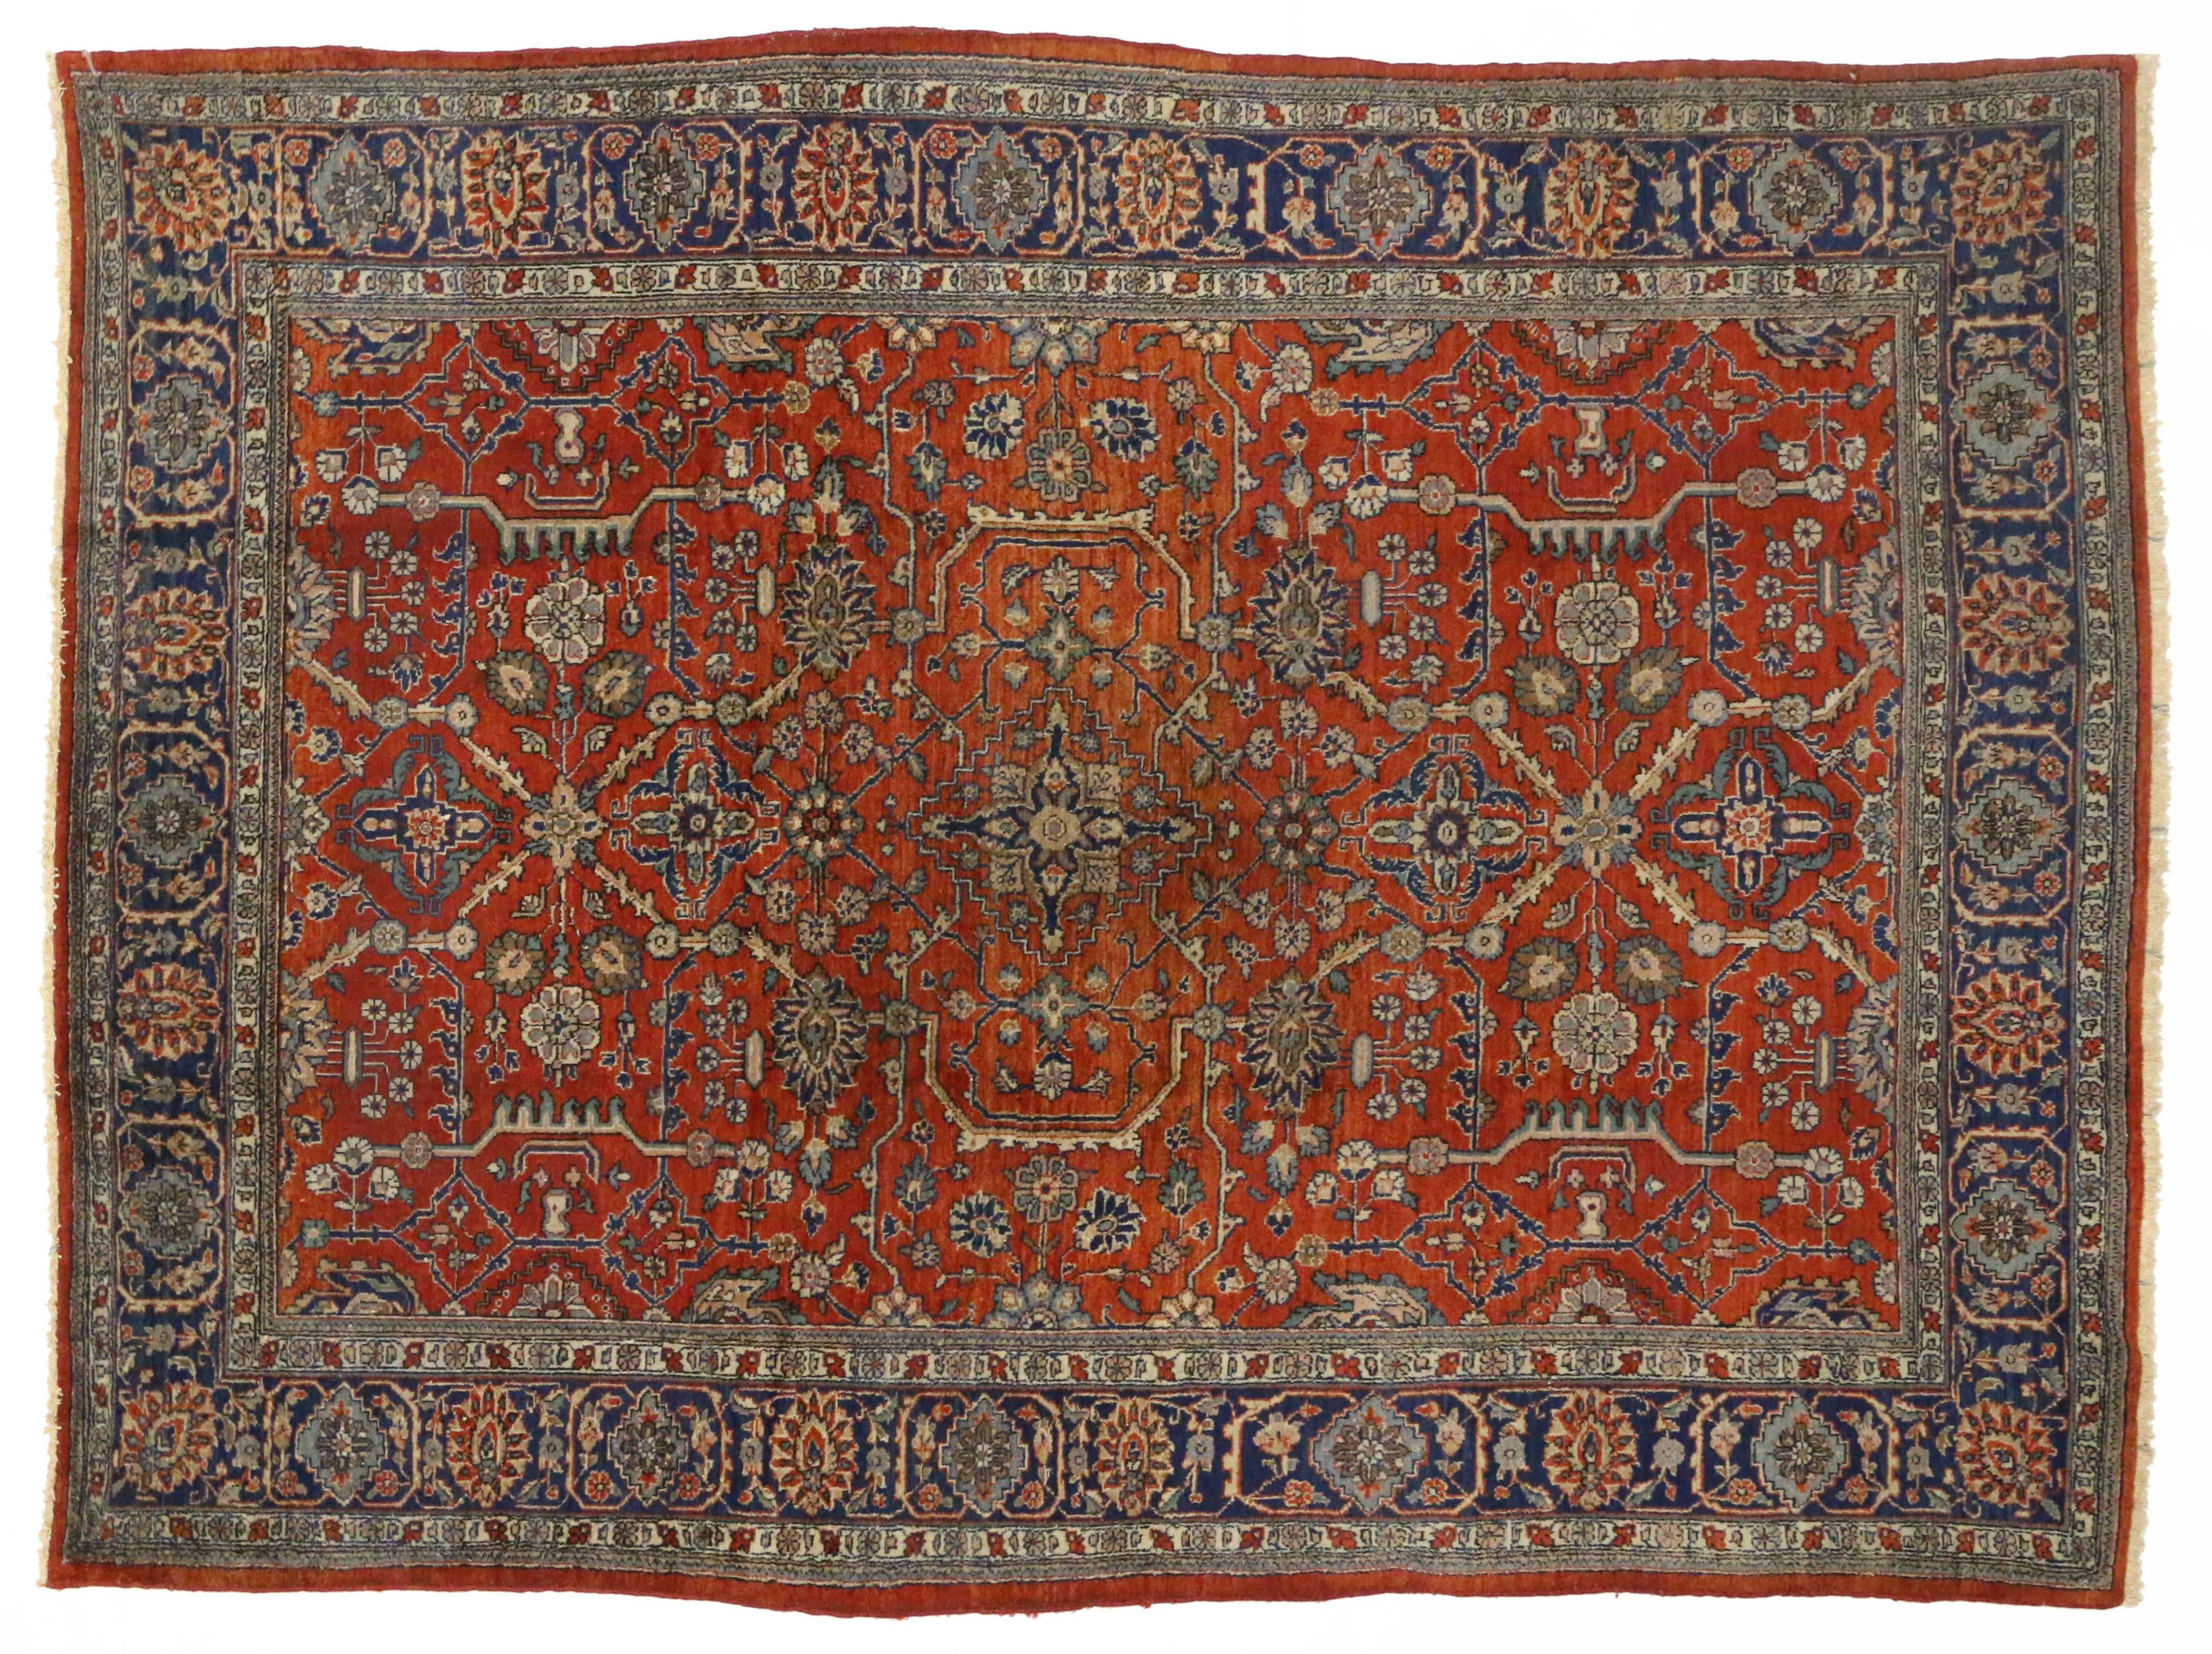 This antique Persian Mahal area rug offers a finely drawn, understated all-over geometric pattern with a brilliant red field to create a highly distinctive atmosphere. Its remarkably refined weave intensifies the rhythmic botanical pattern and